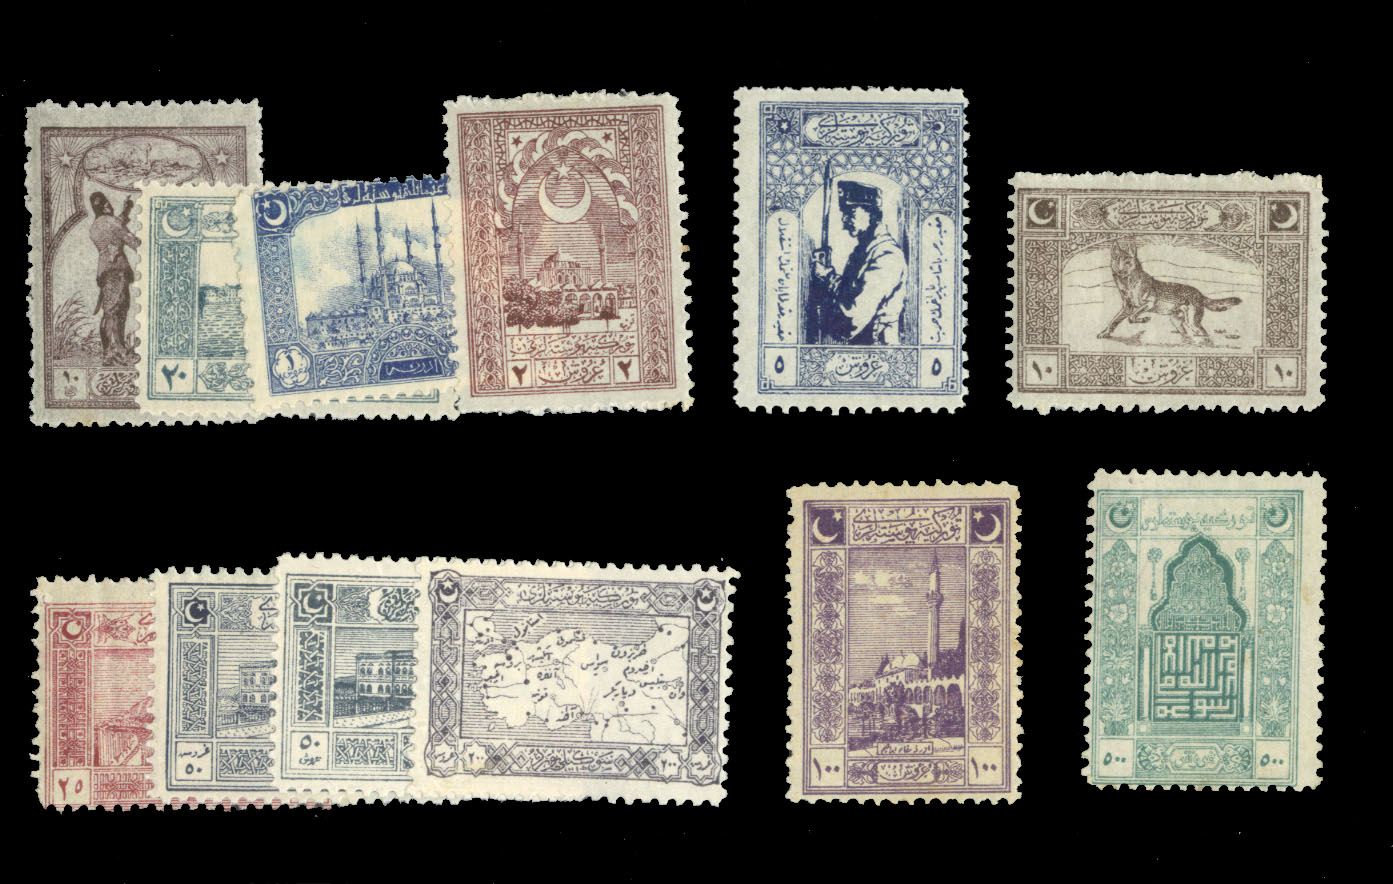 Lot 1360 - LARGE LOTS AND COLLECTIONS BAHAMAS  -  Cherrystone Auctions U.S. & Worldwide Stamps & Postal History